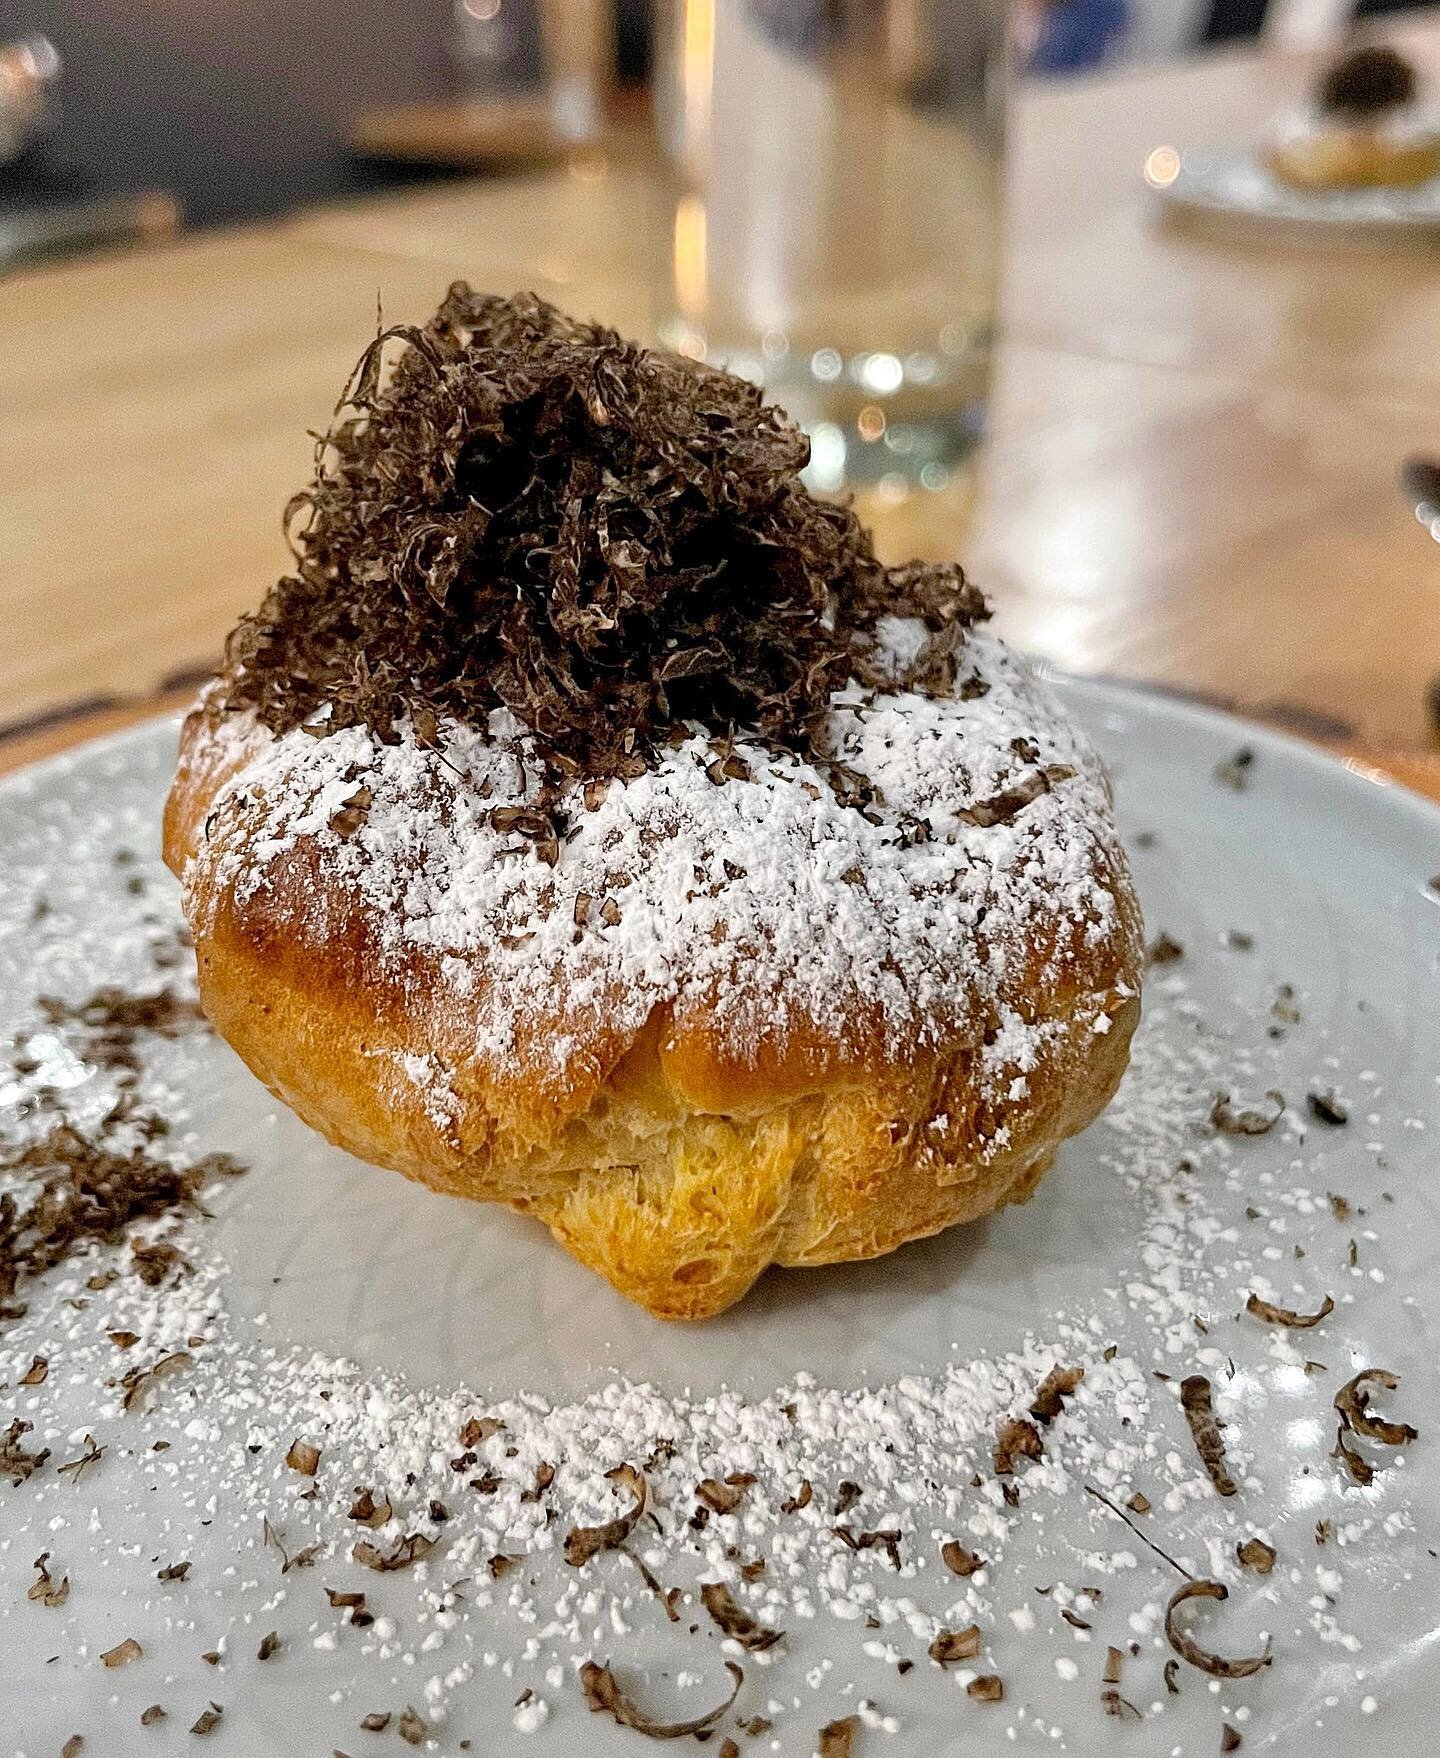 There are only a few more weeks to enjoy &ldquo;Fire&rdquo; at @counterclt, and like all of @chefsamhart&rsquo;s menus, it&rsquo;s an experience unlike anything we&rsquo;ve ever had in Charlotte (I mean, they recently received two Michigan Pugs, so y